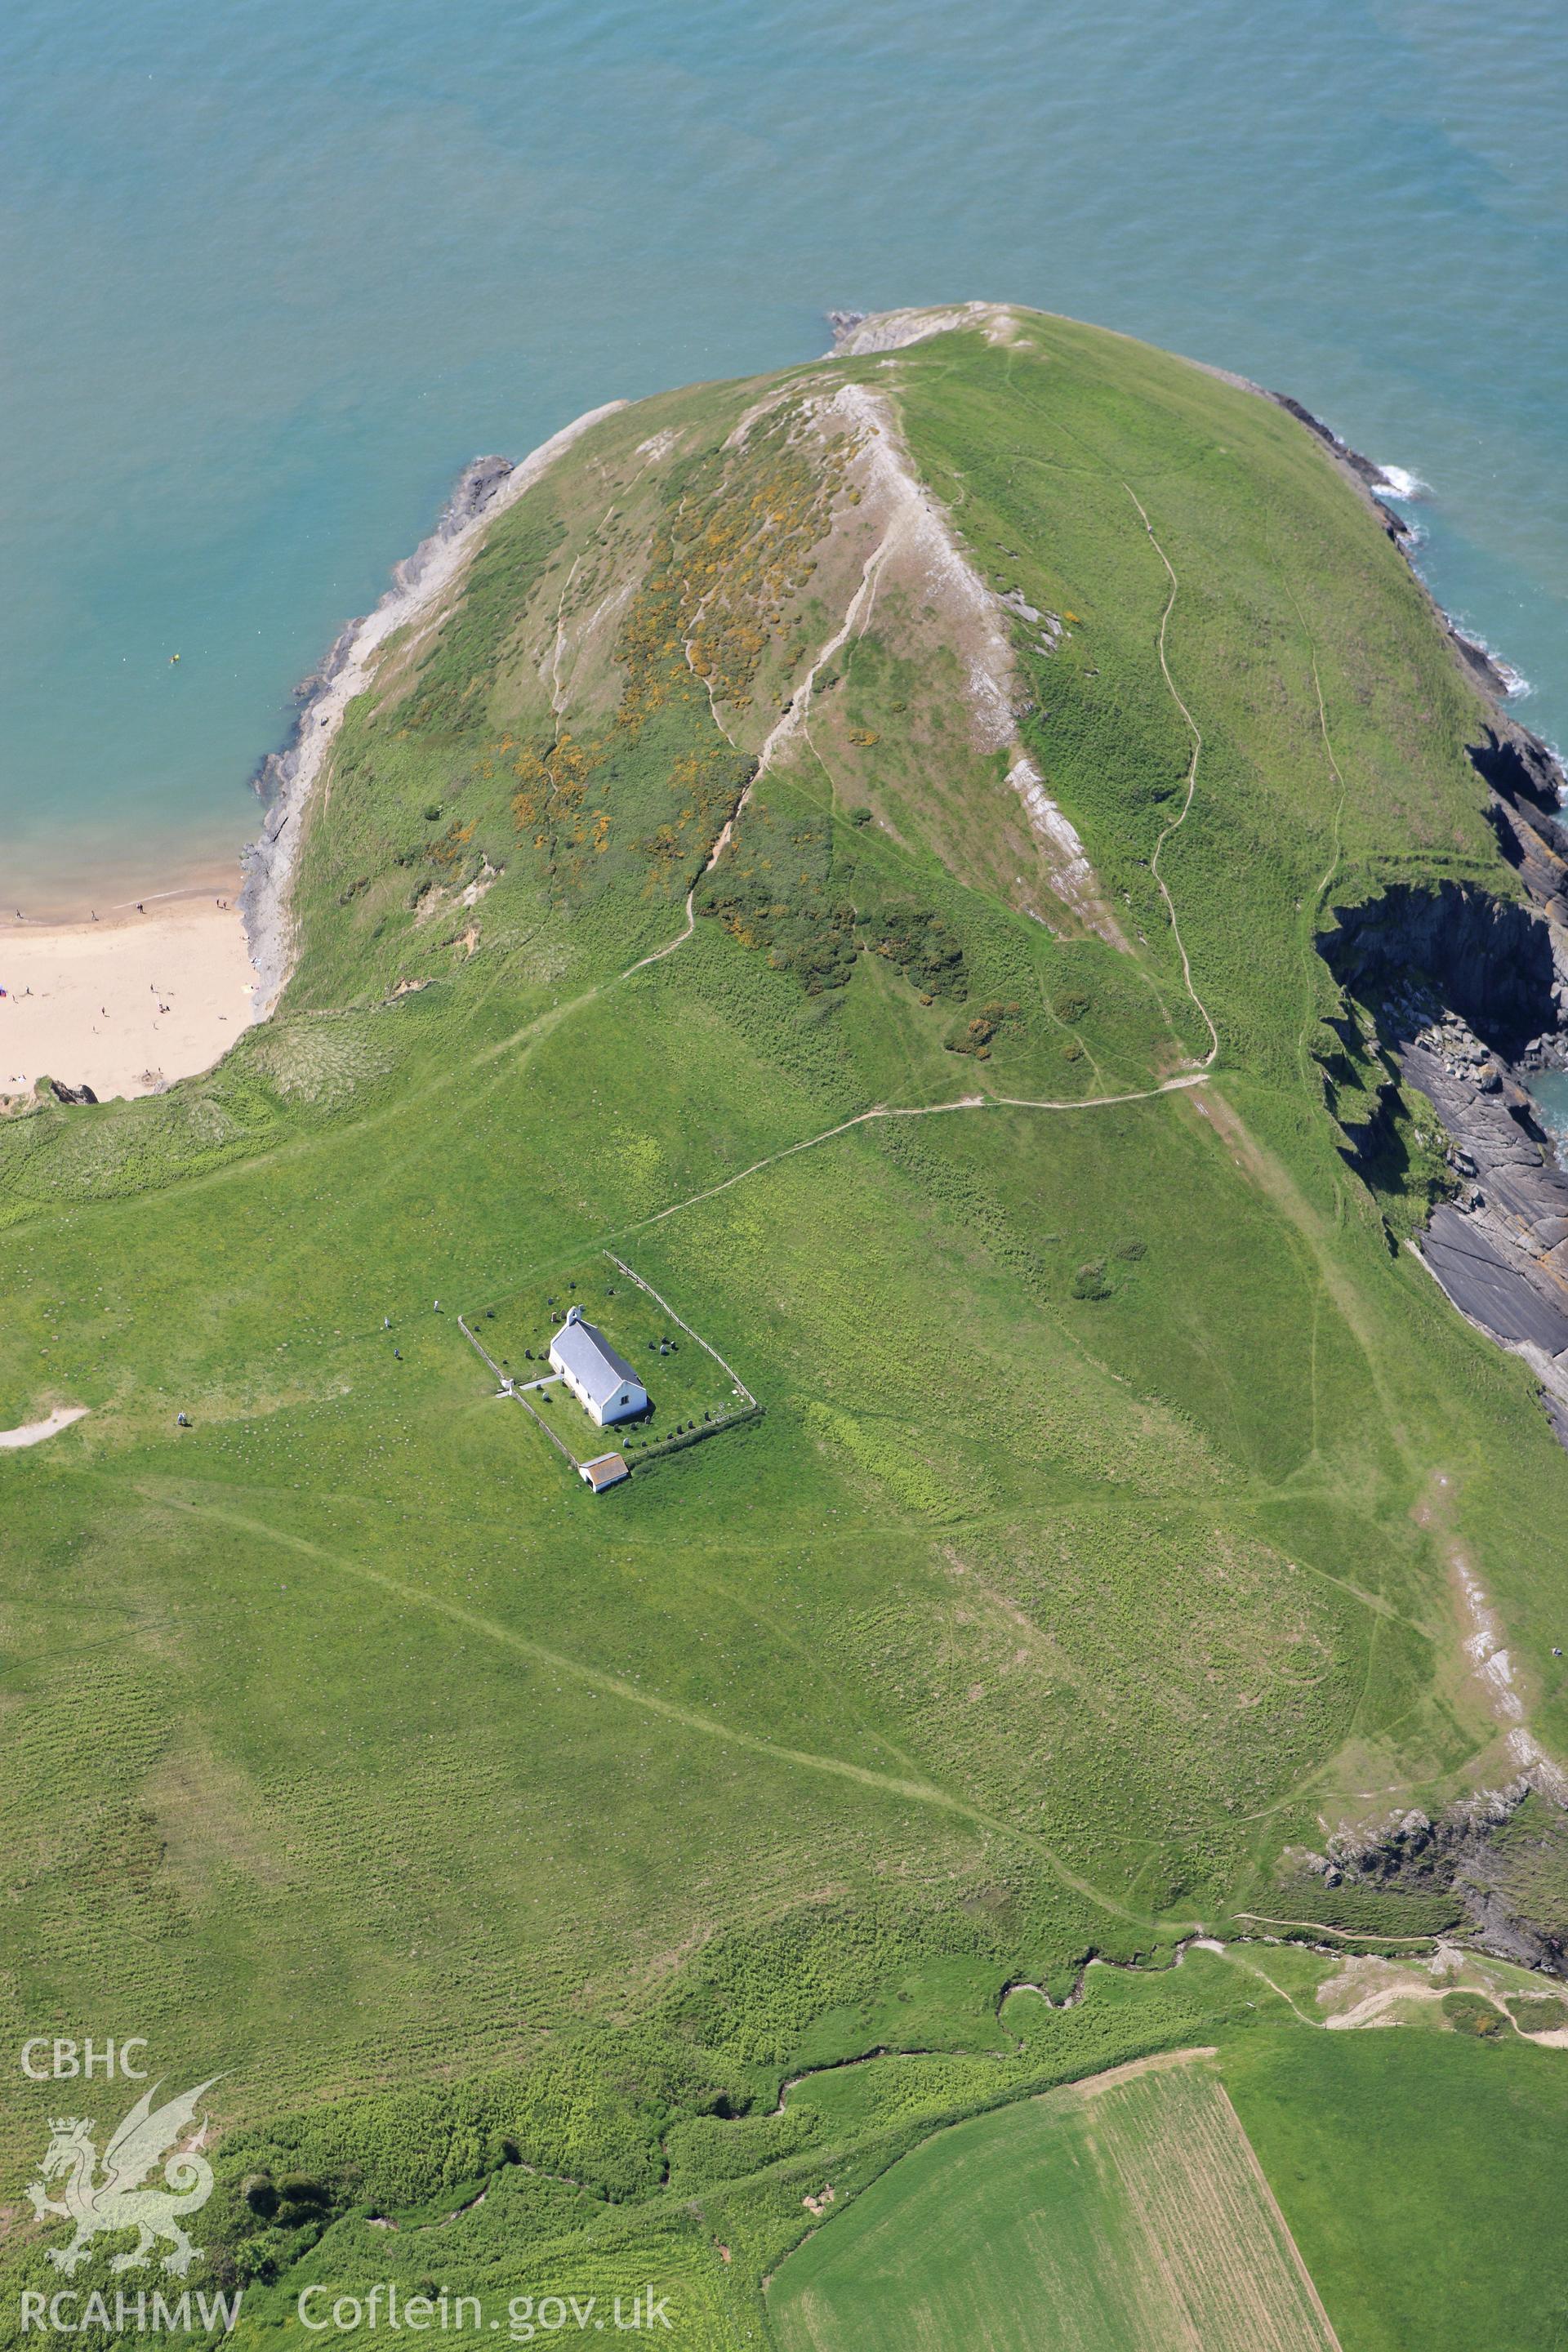 RCAHMW colour oblique aerial photograph of Holy Cross Church, Mwnt Verwig Taken on 01 June 2009 by Toby Driver